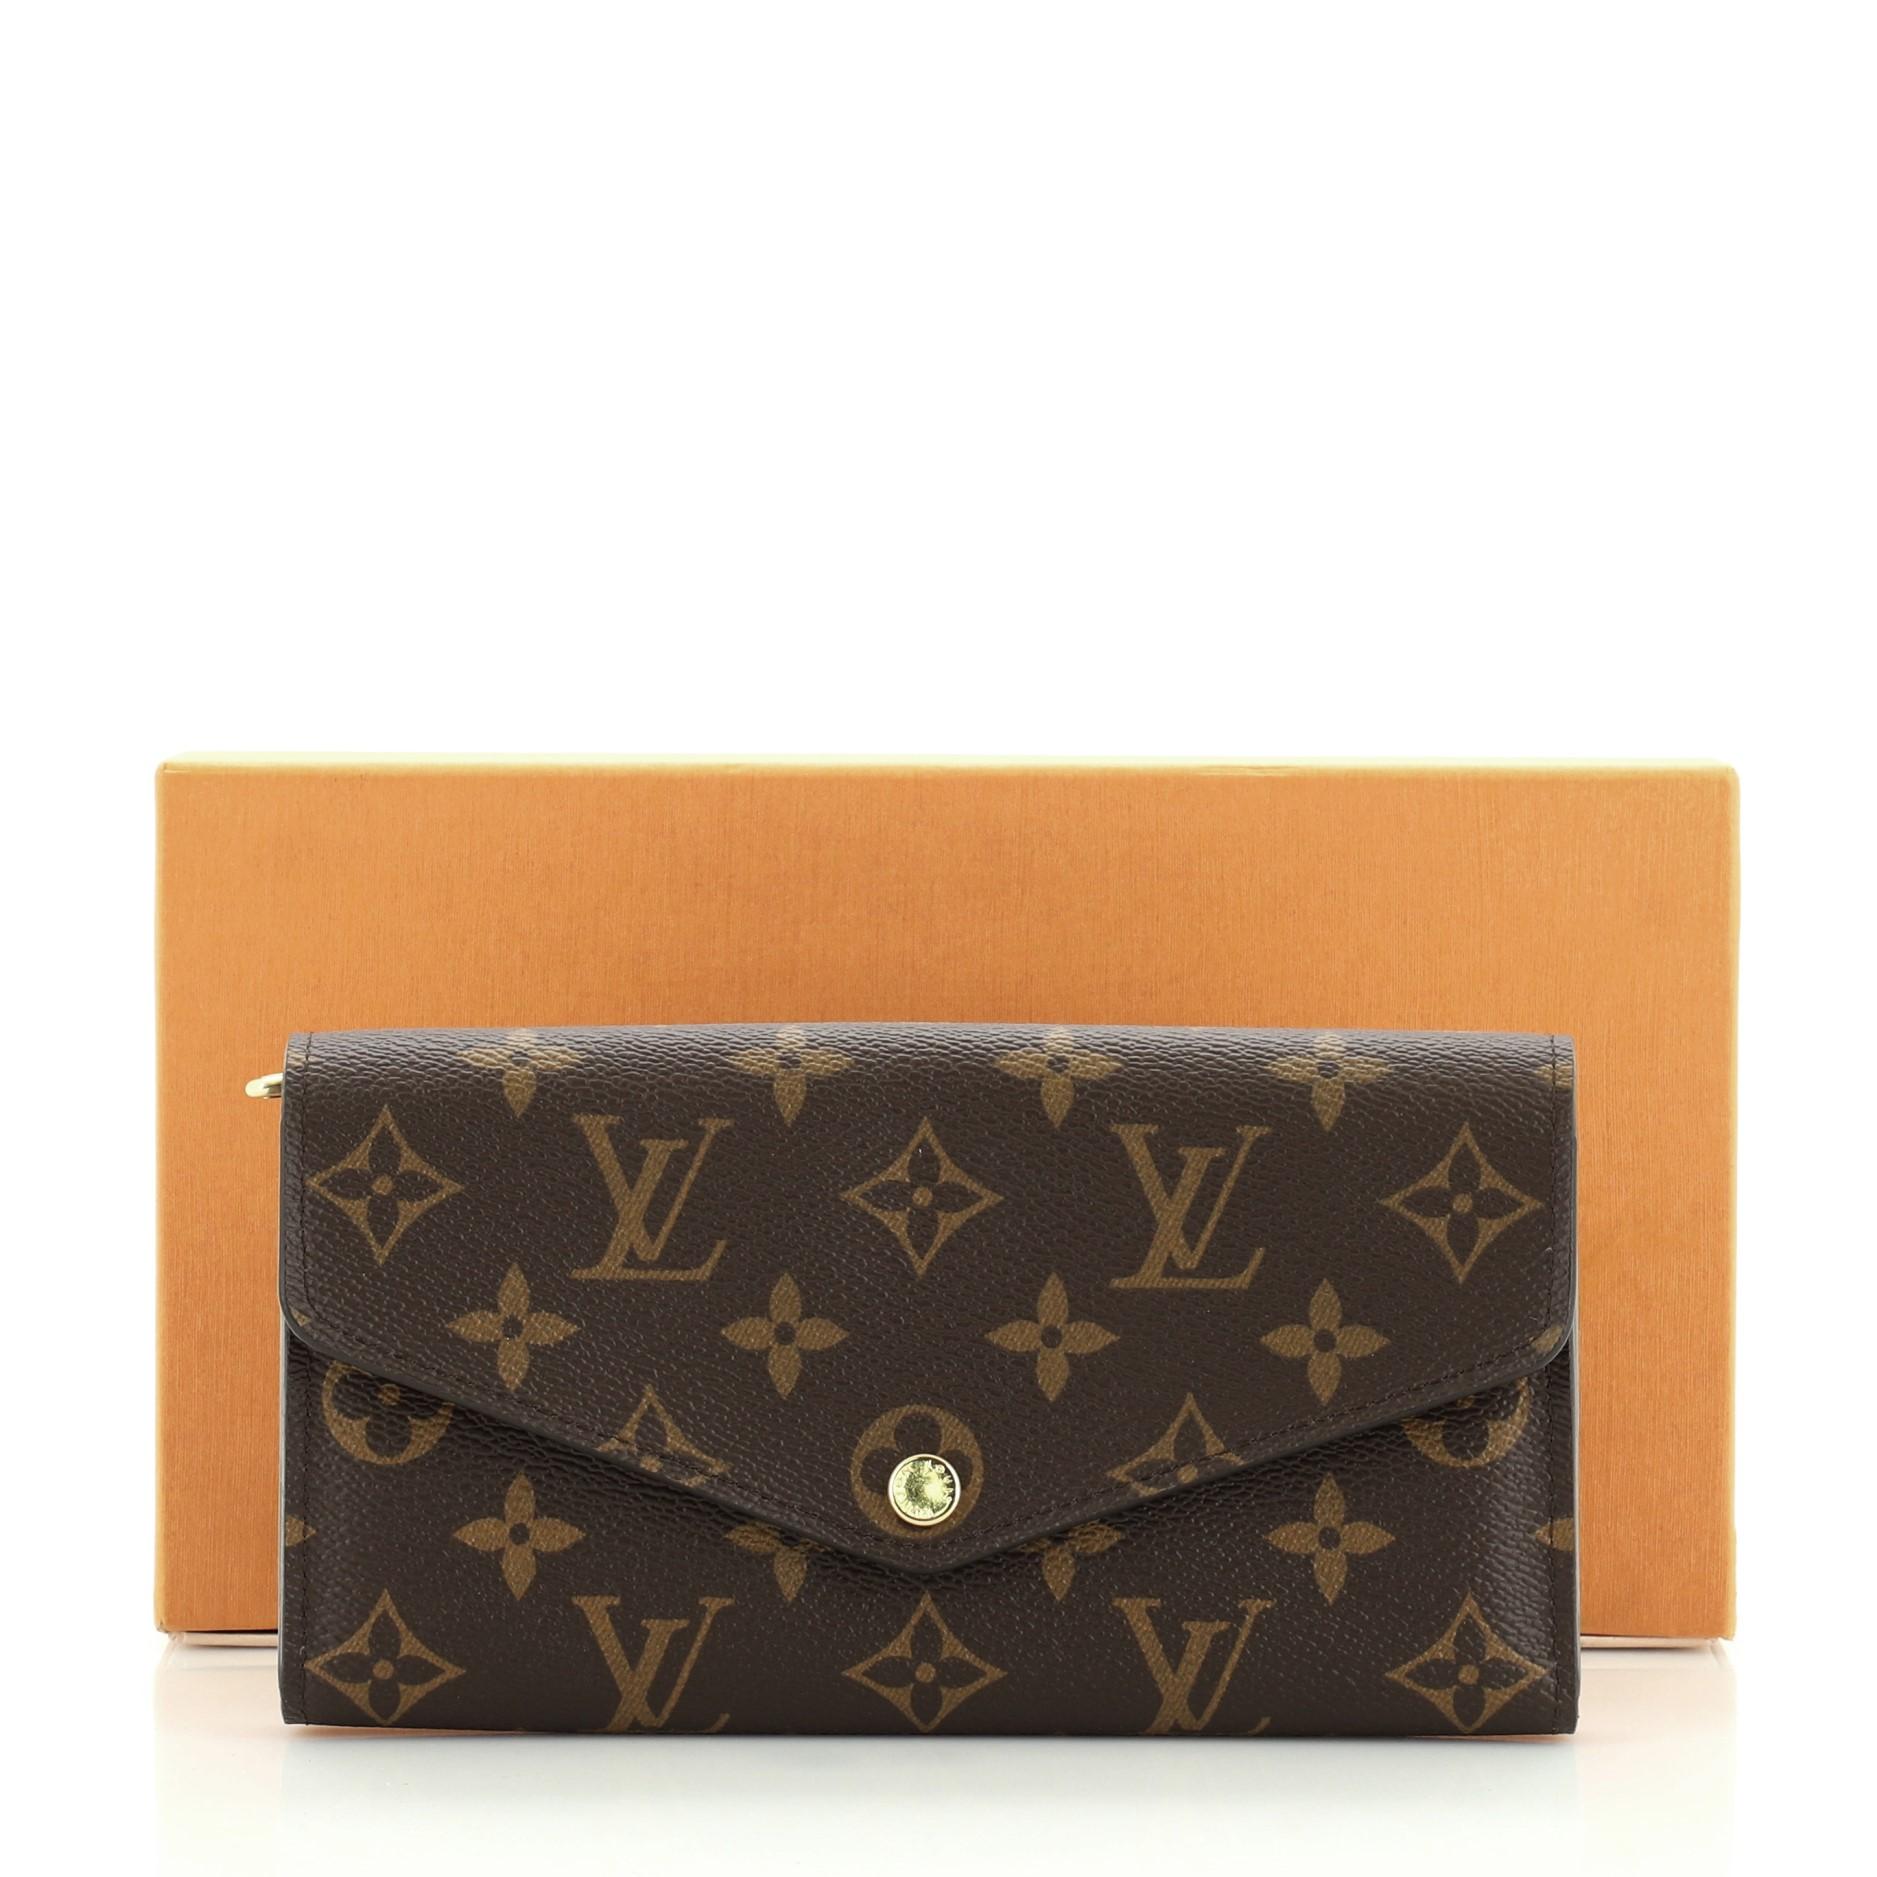 This Louis Vuitton Sarah Wallet NM Monogram Canvas, crafted in brown monogram coated canvas, features an envelope-style frontal flap and gold-tone hardware. Its snap button closure opens to a brown leather interior with multiple card slots and